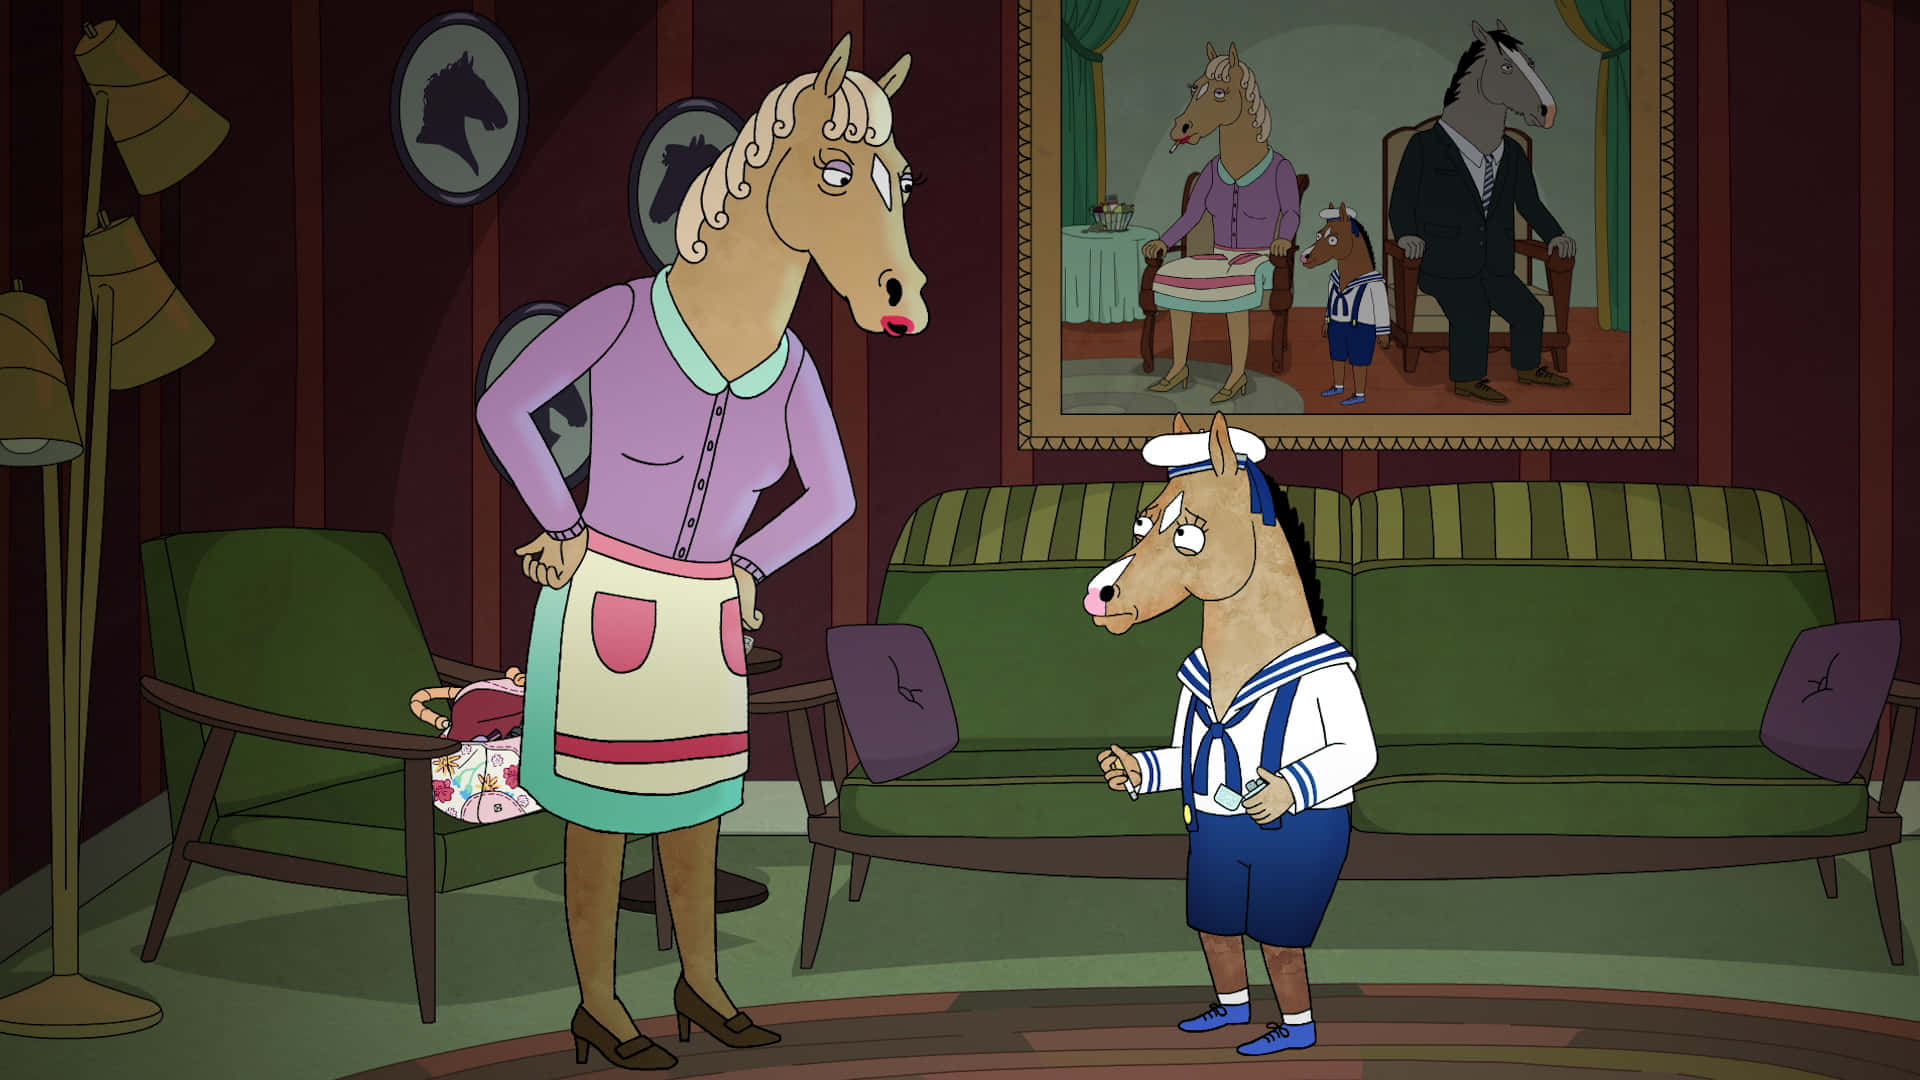 Bojack Horseman embarks on a journey of personal growth